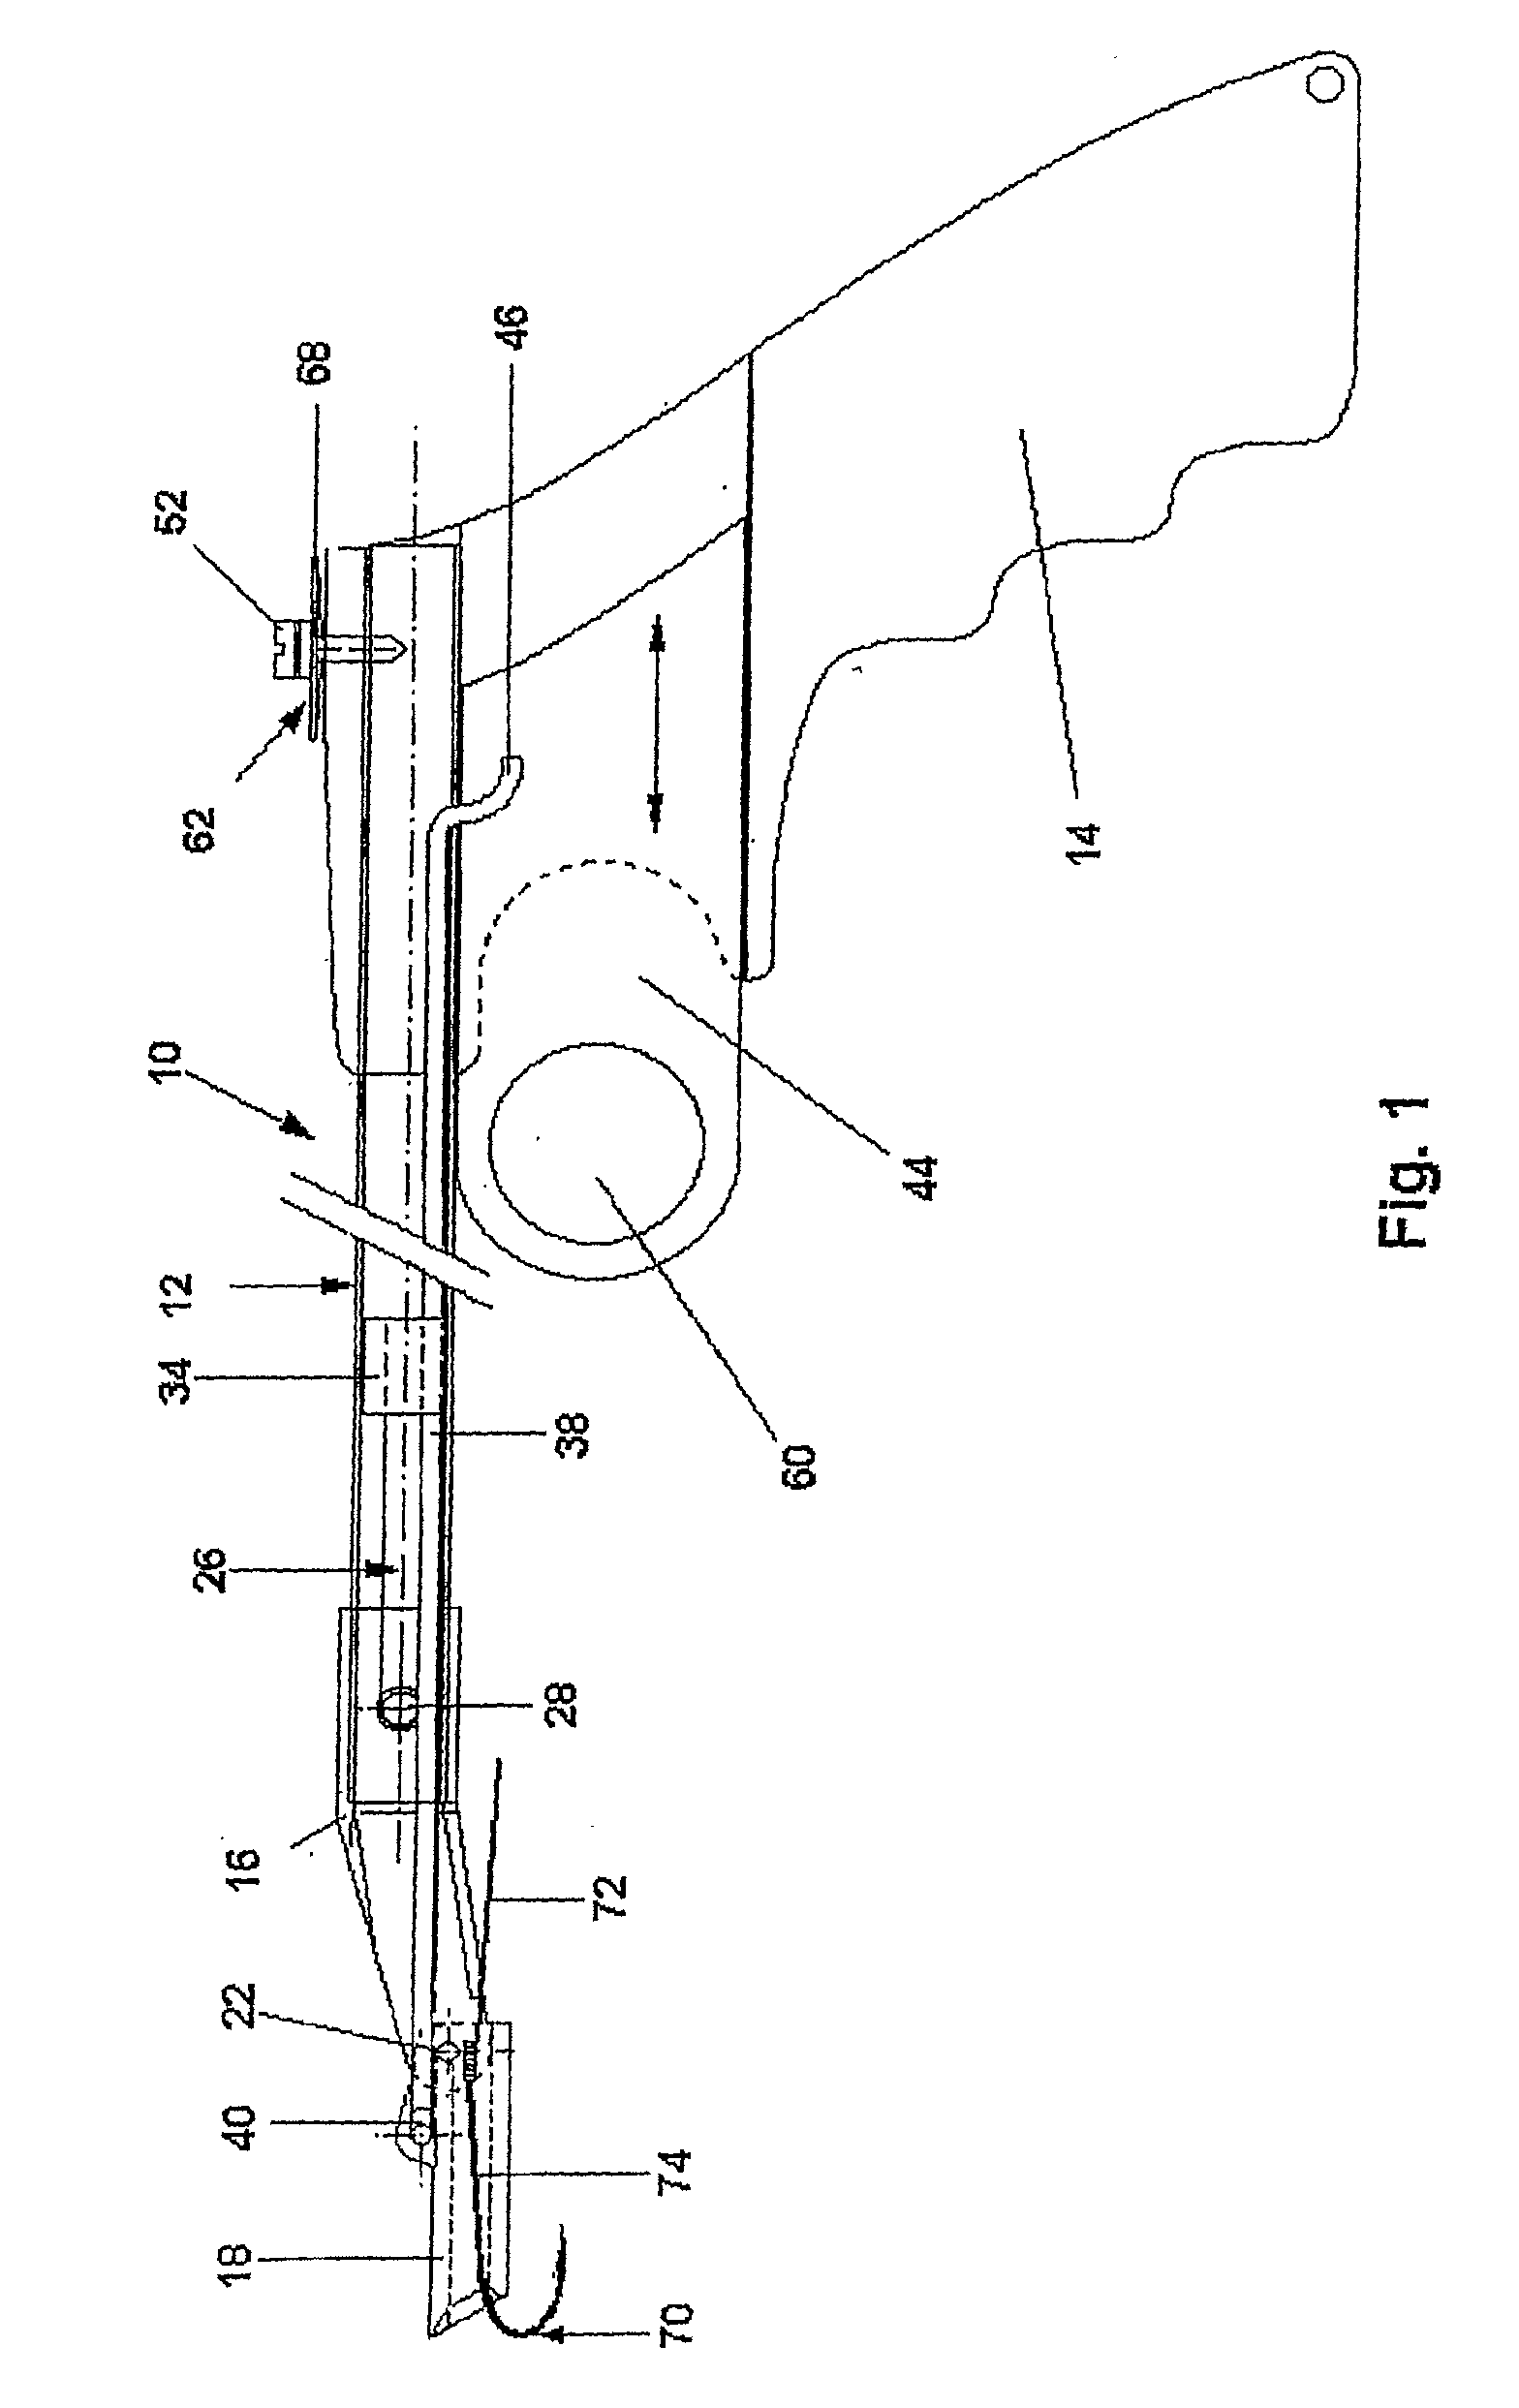 Apparatus for Extracting a Fishing Hook